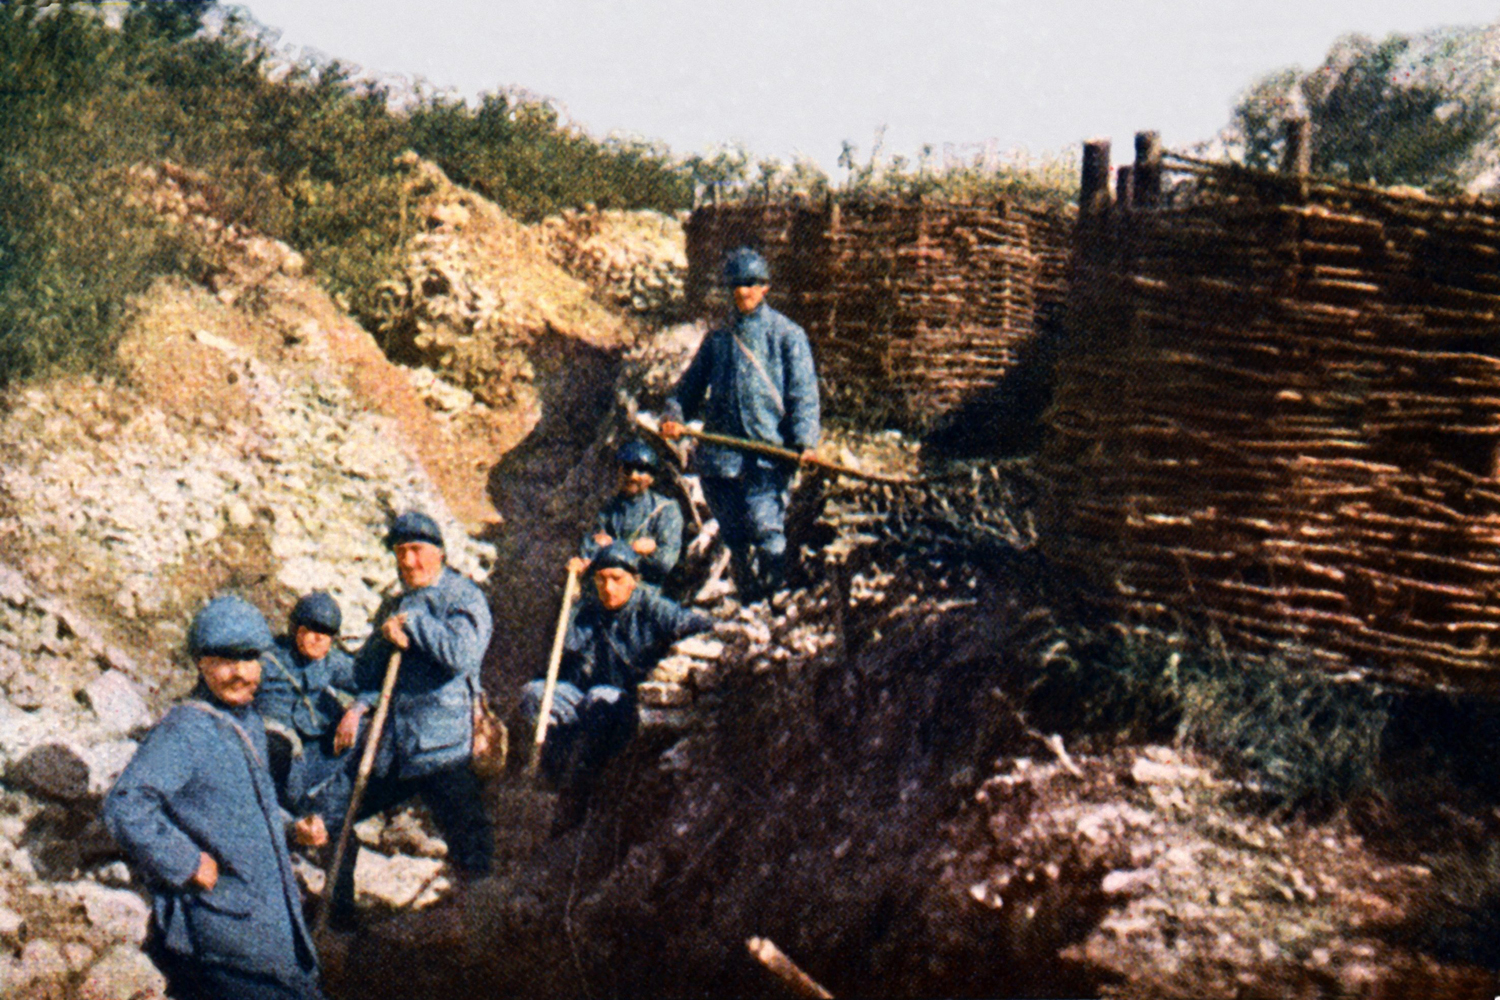 French soldiers in front of the Voevre during the Battle of Verdun on the Western Front in France, September 1916.